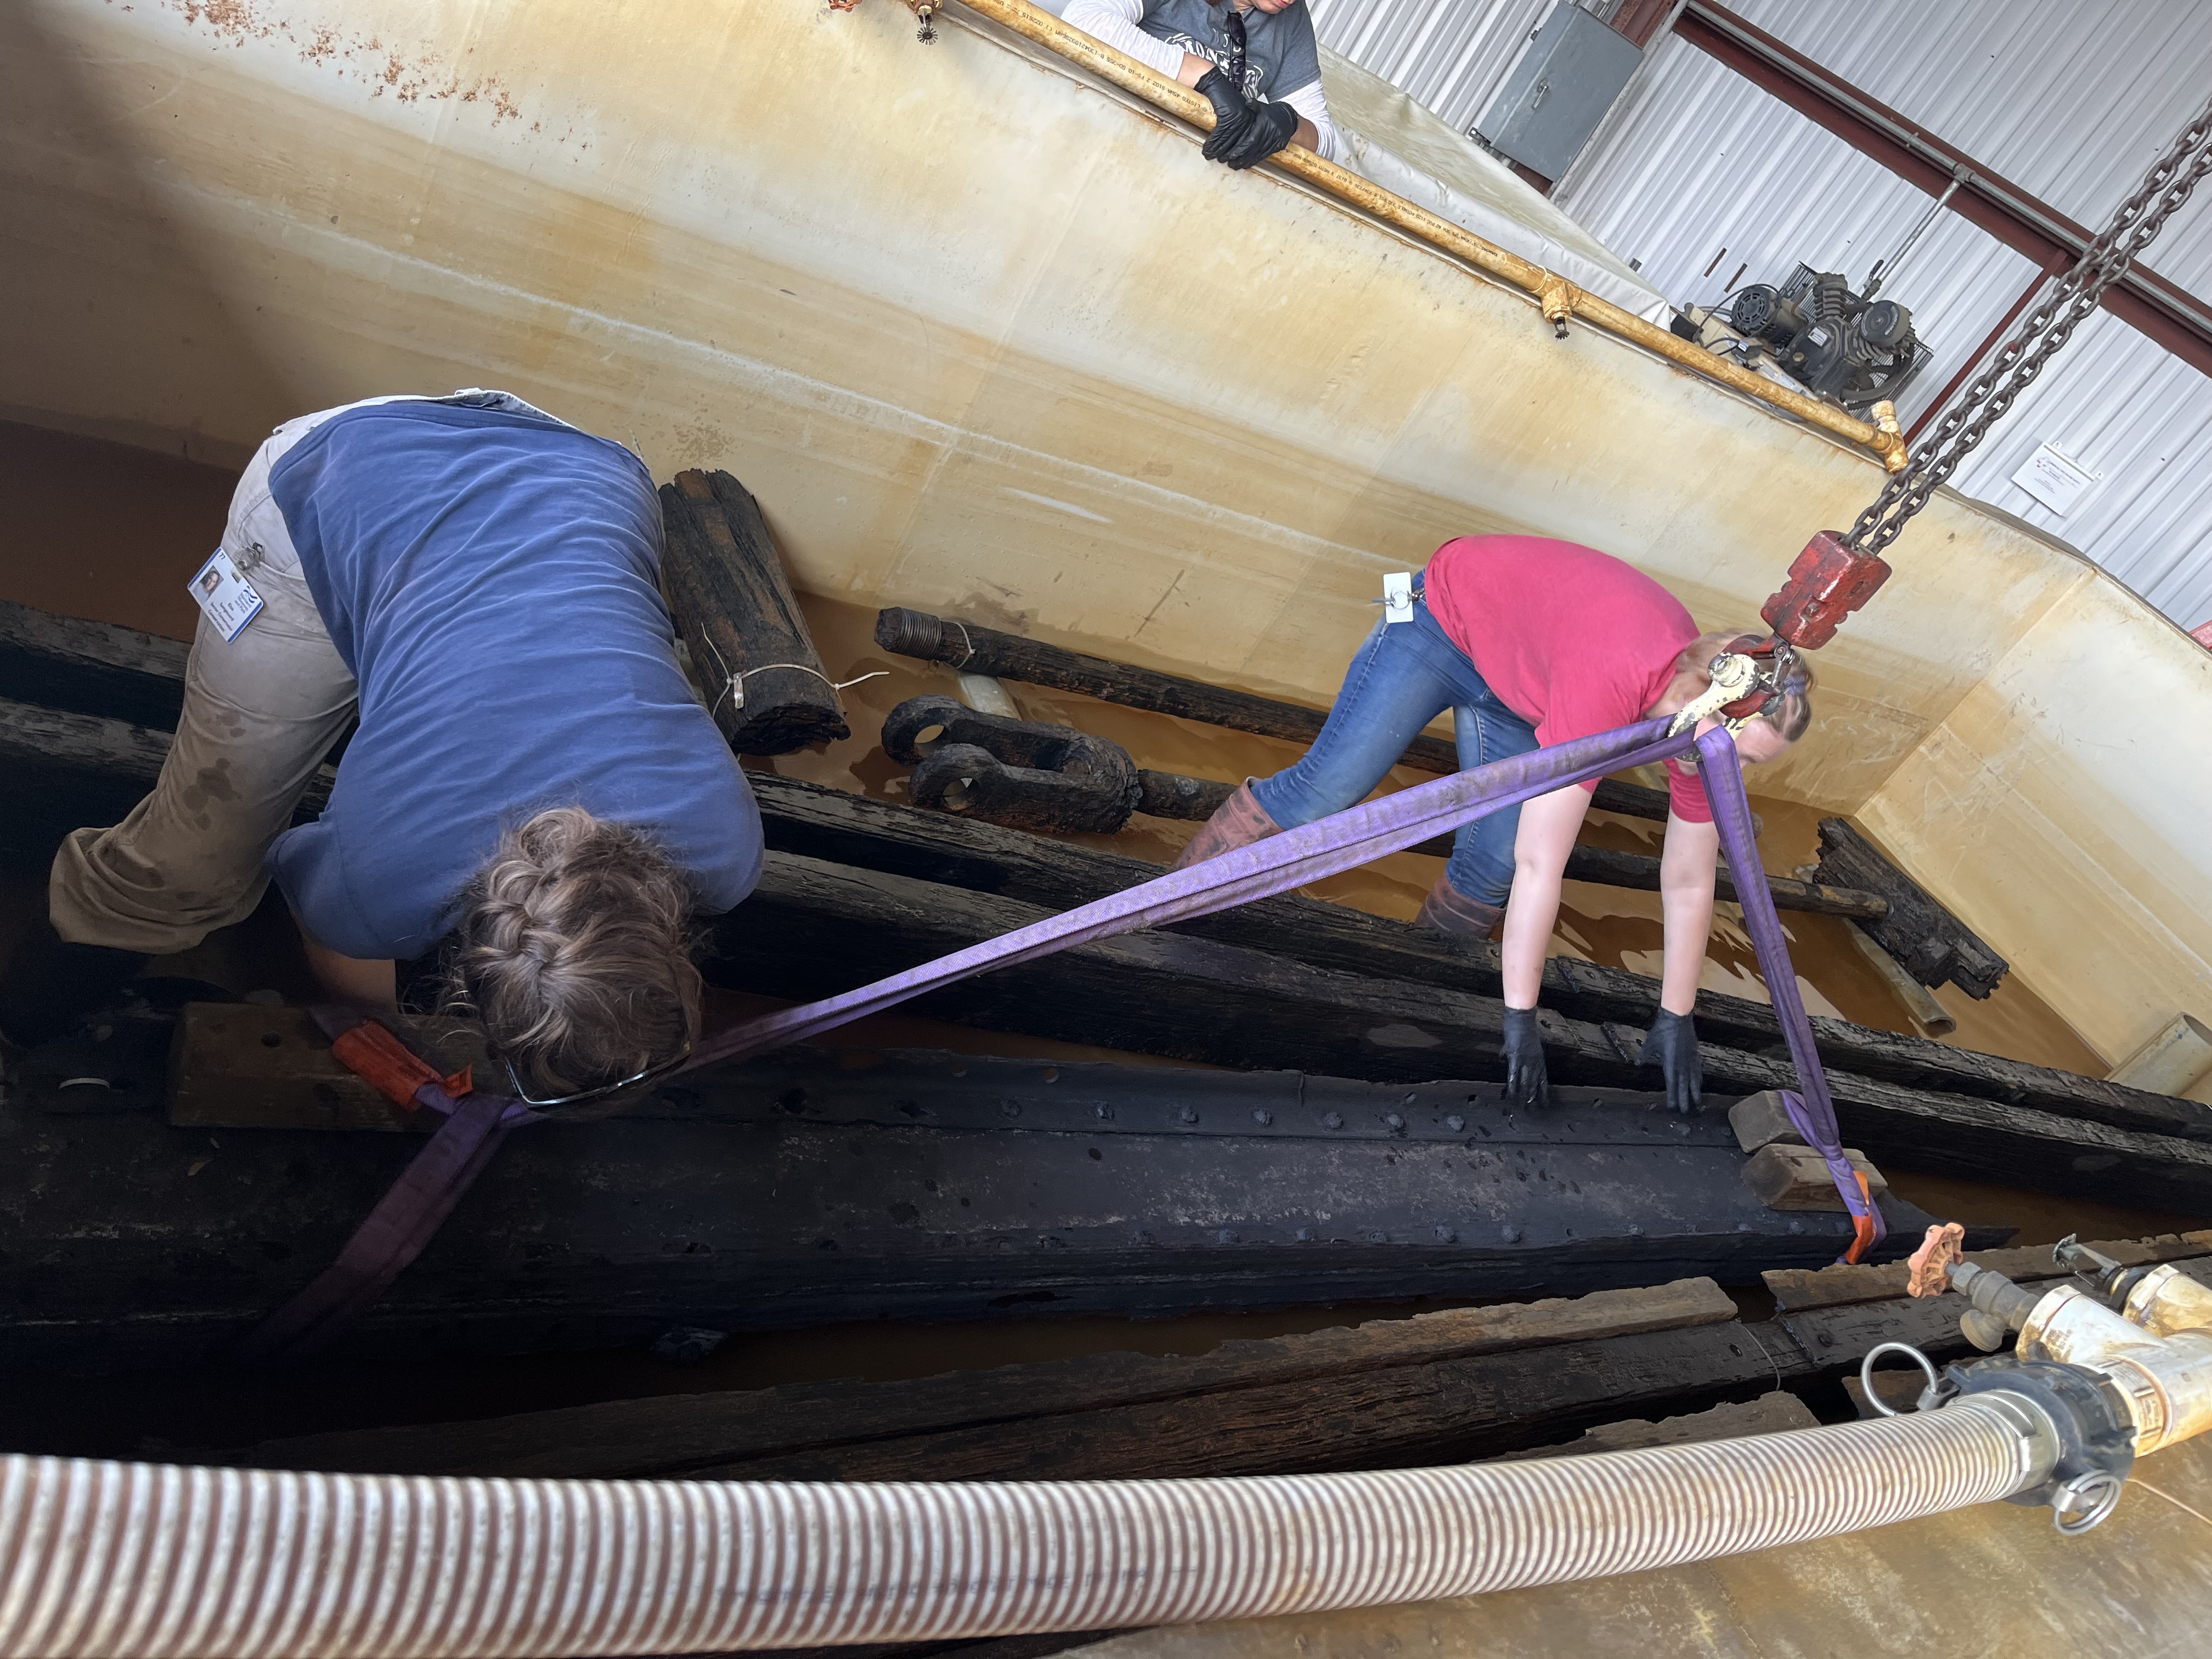 This tank holds some of our longest objects! Here you see Senior Conservator Elsa Sangouard and Assistant Archaeological Conservator Olivia Haslam rigging up one of the gun carriage rails (accession number MNMS-2001-003-241A) to be lifted out of the tank via crane.